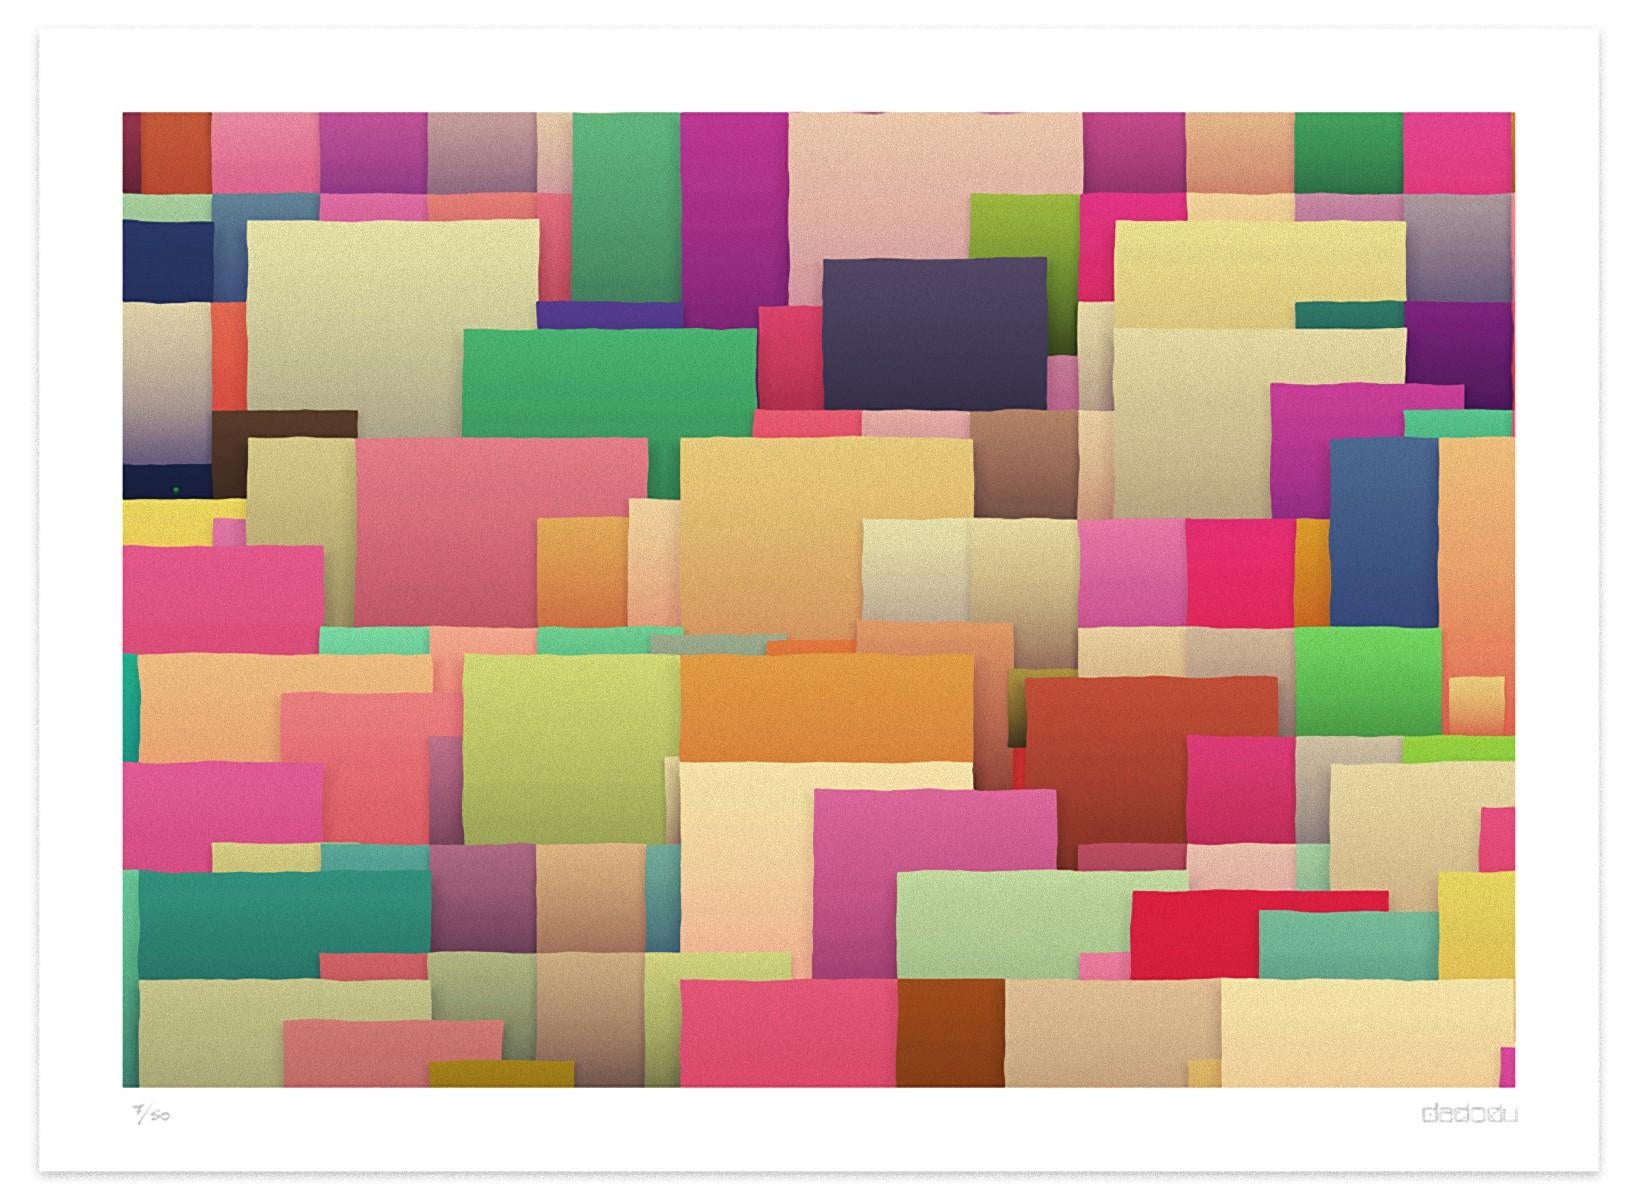 Business Card  is an lovely  giclée print realized by the contemporary artist Dadodu in 2003.

This original artwork represents a colorful mosaic of overlapping pieces of paper.

Hand-signed on the lower right corner "Dadodu" and numbered on the